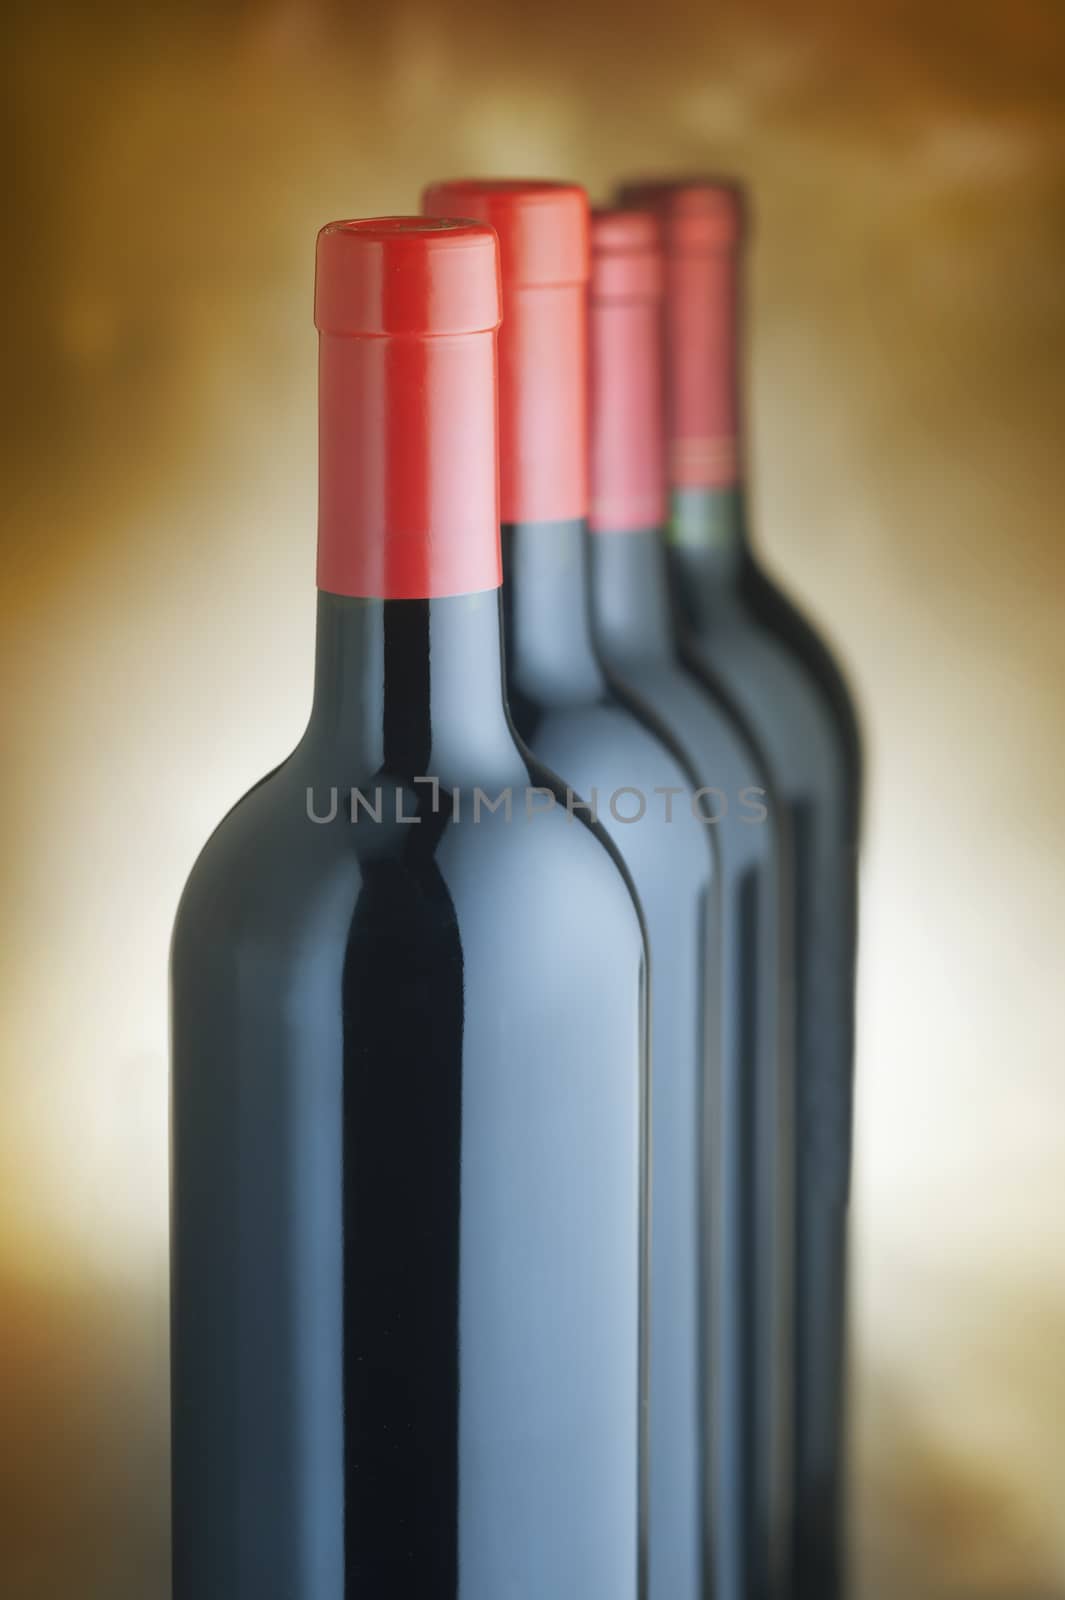 Red wine bottles by f/2sumicron